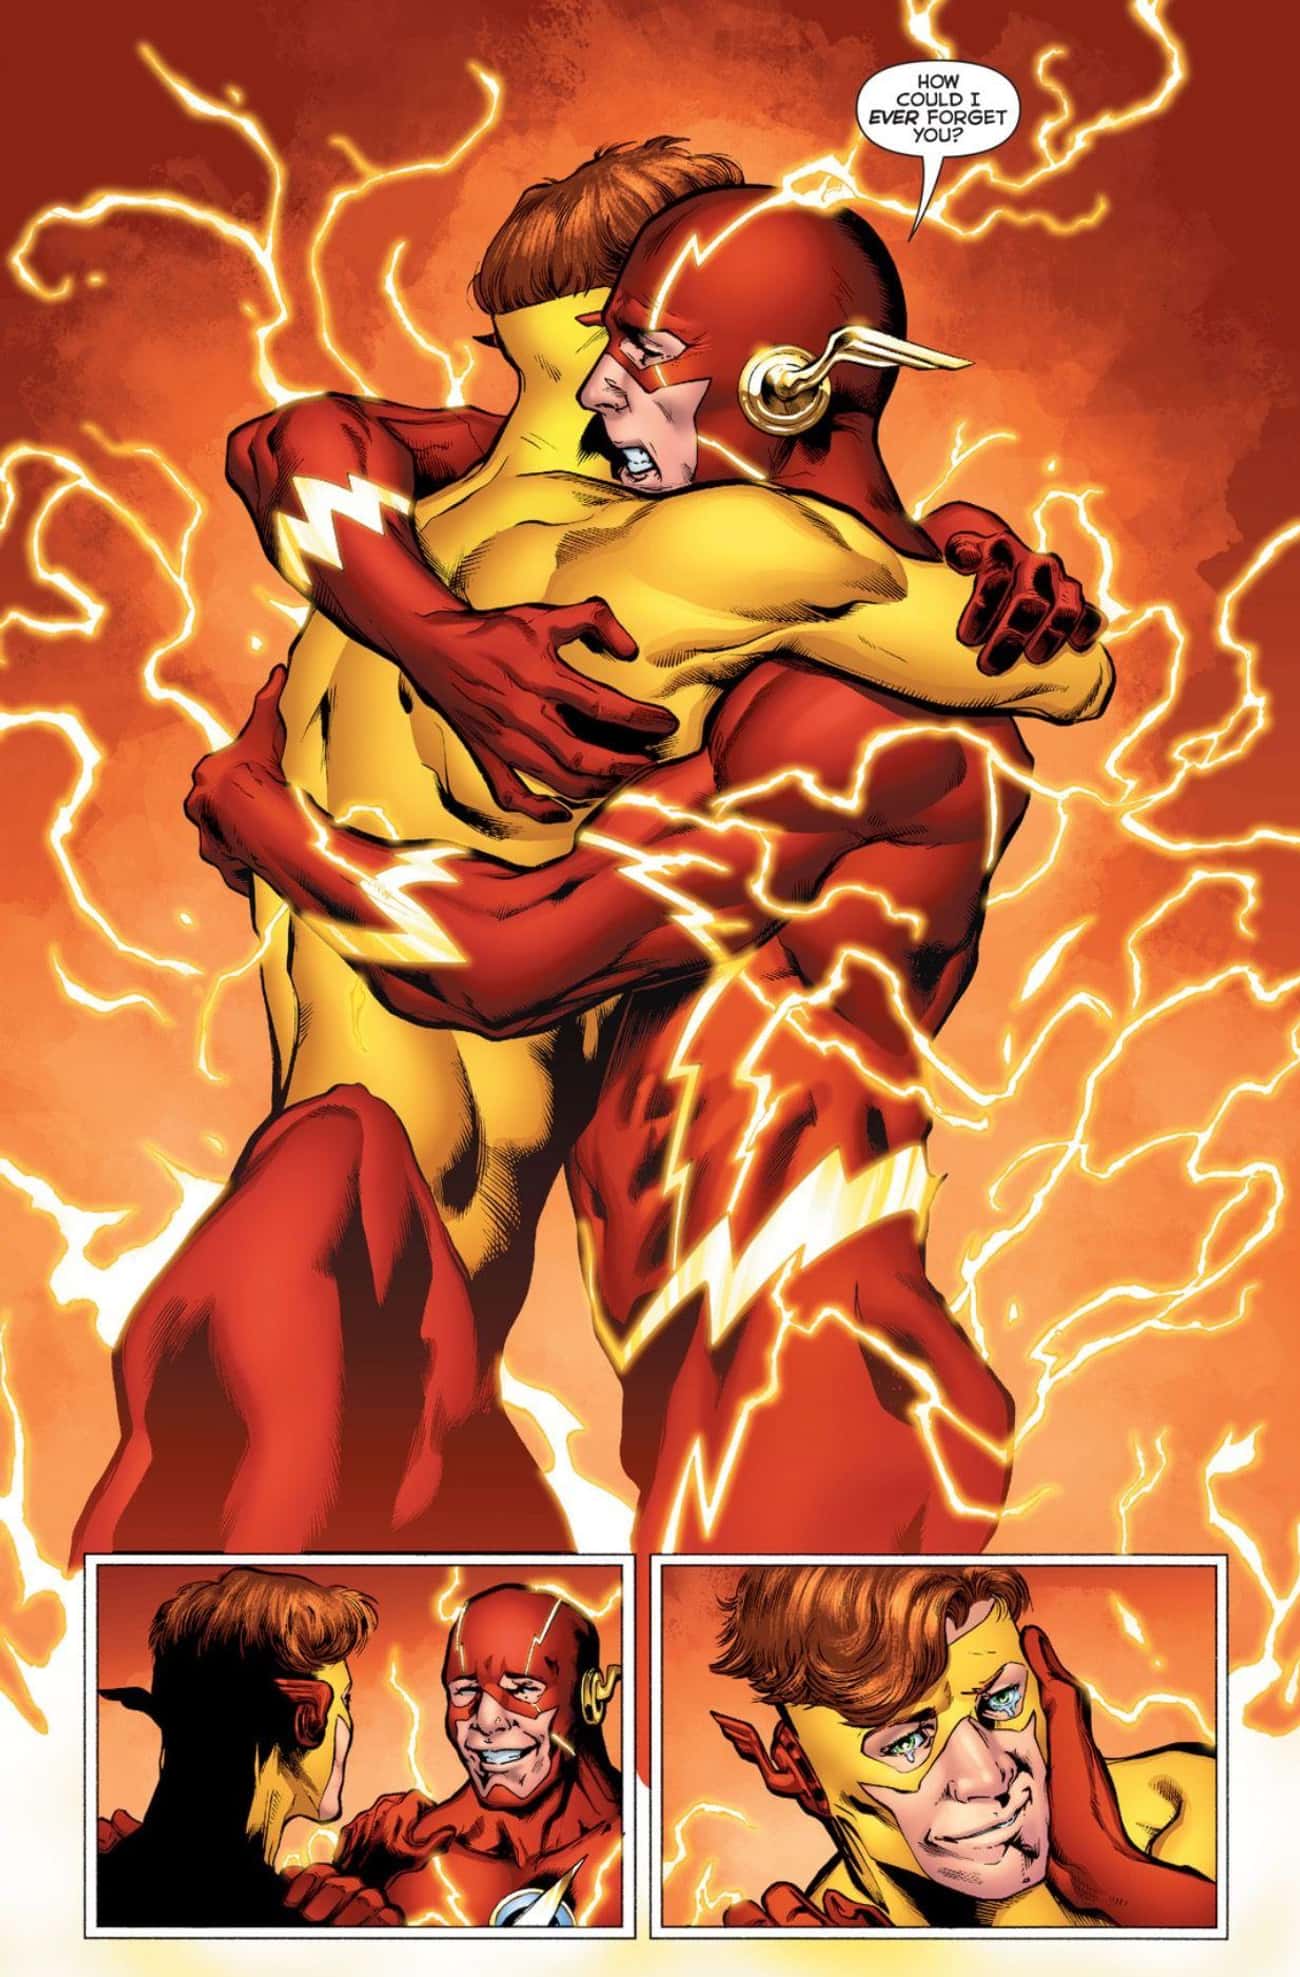 Barry Allen Remembering Wally West in DC Universe Rebirth